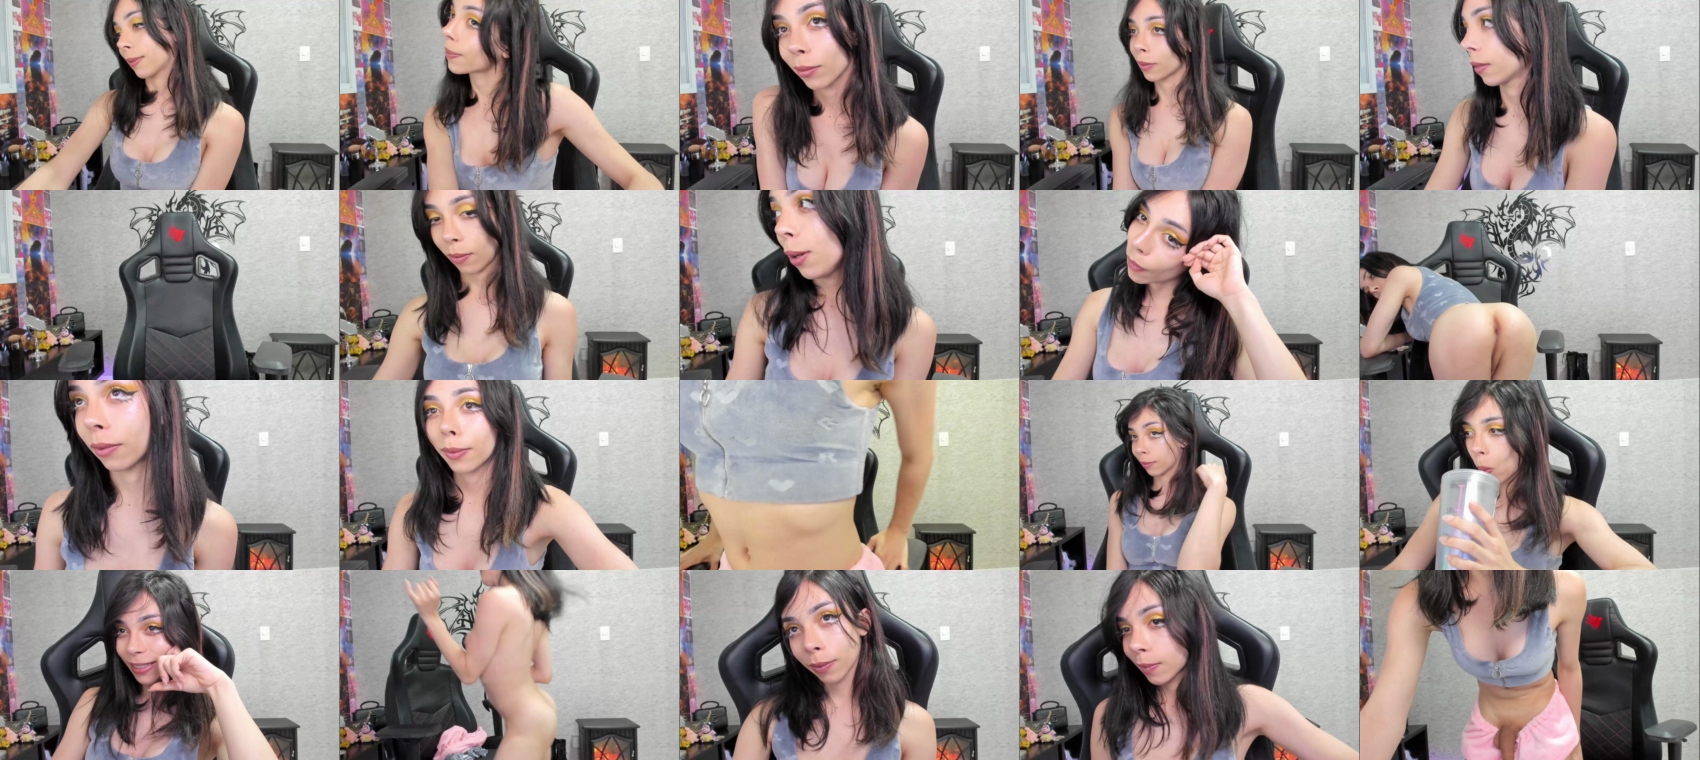 altbonny sexybody CAM SHOW @ Chaturbate 05-01-2023